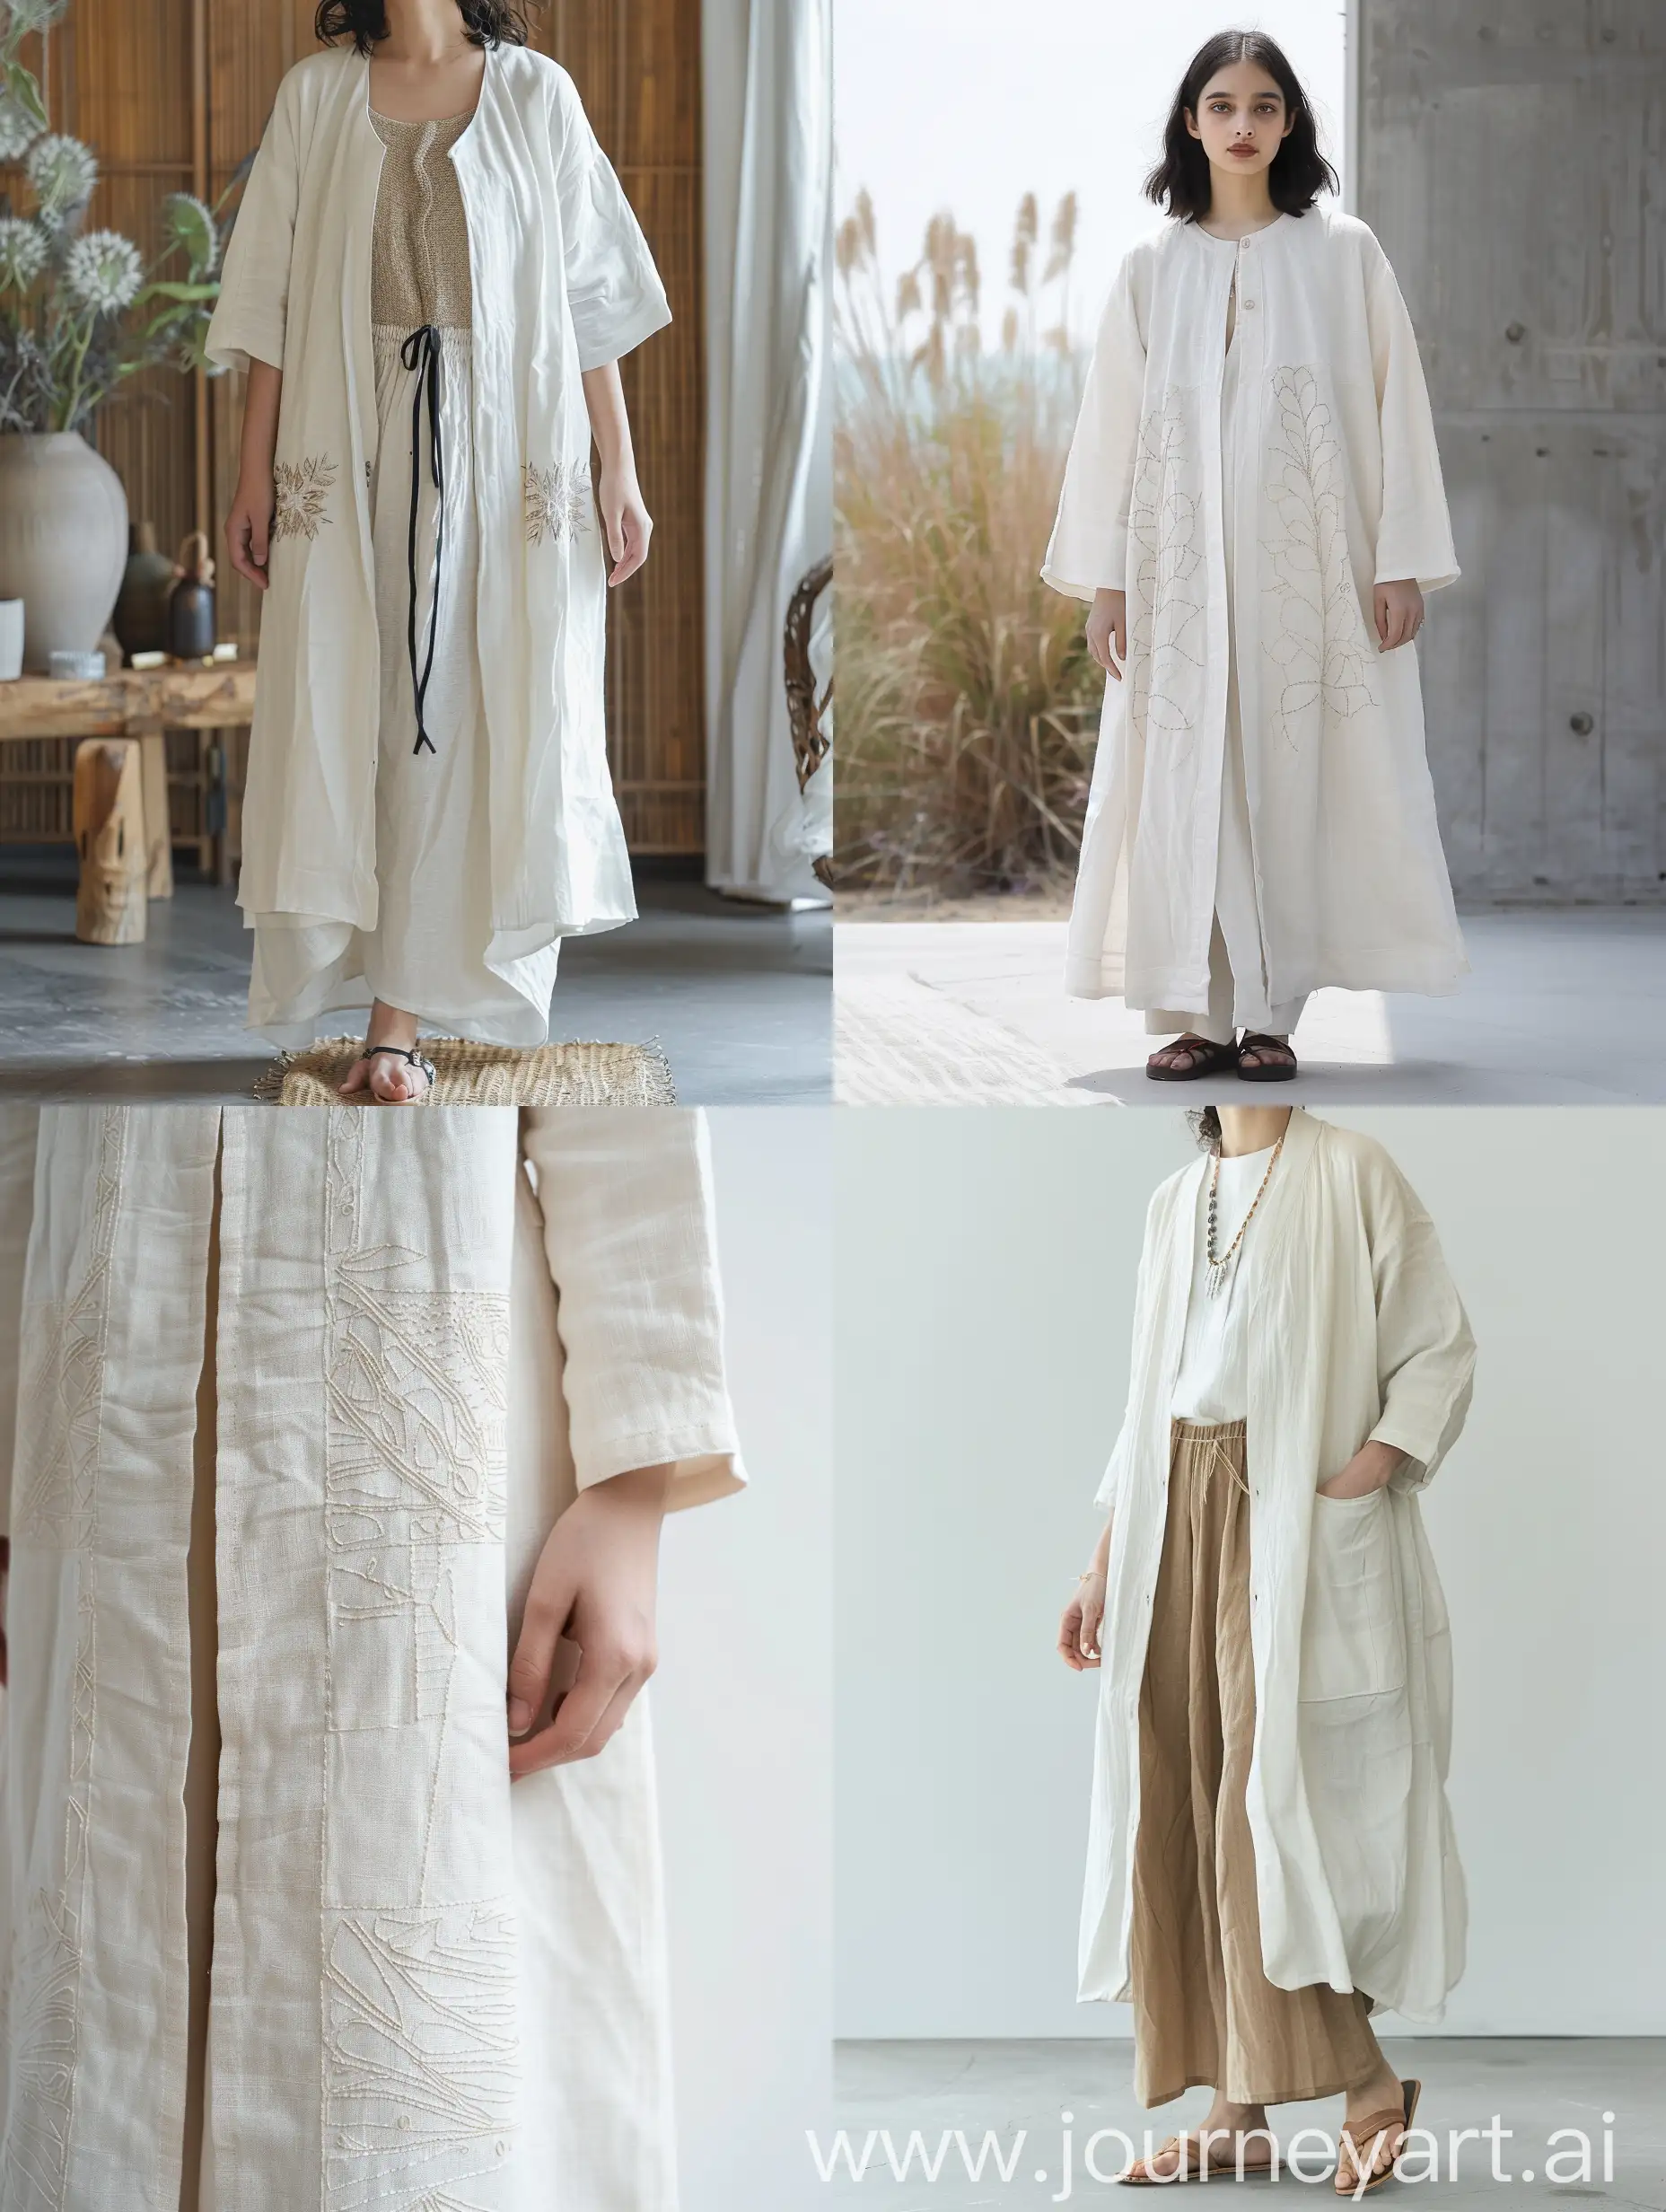 Handmade-Cream-Linen-Coat-with-Minimal-Embroidery-Over-Simple-Long-Dress